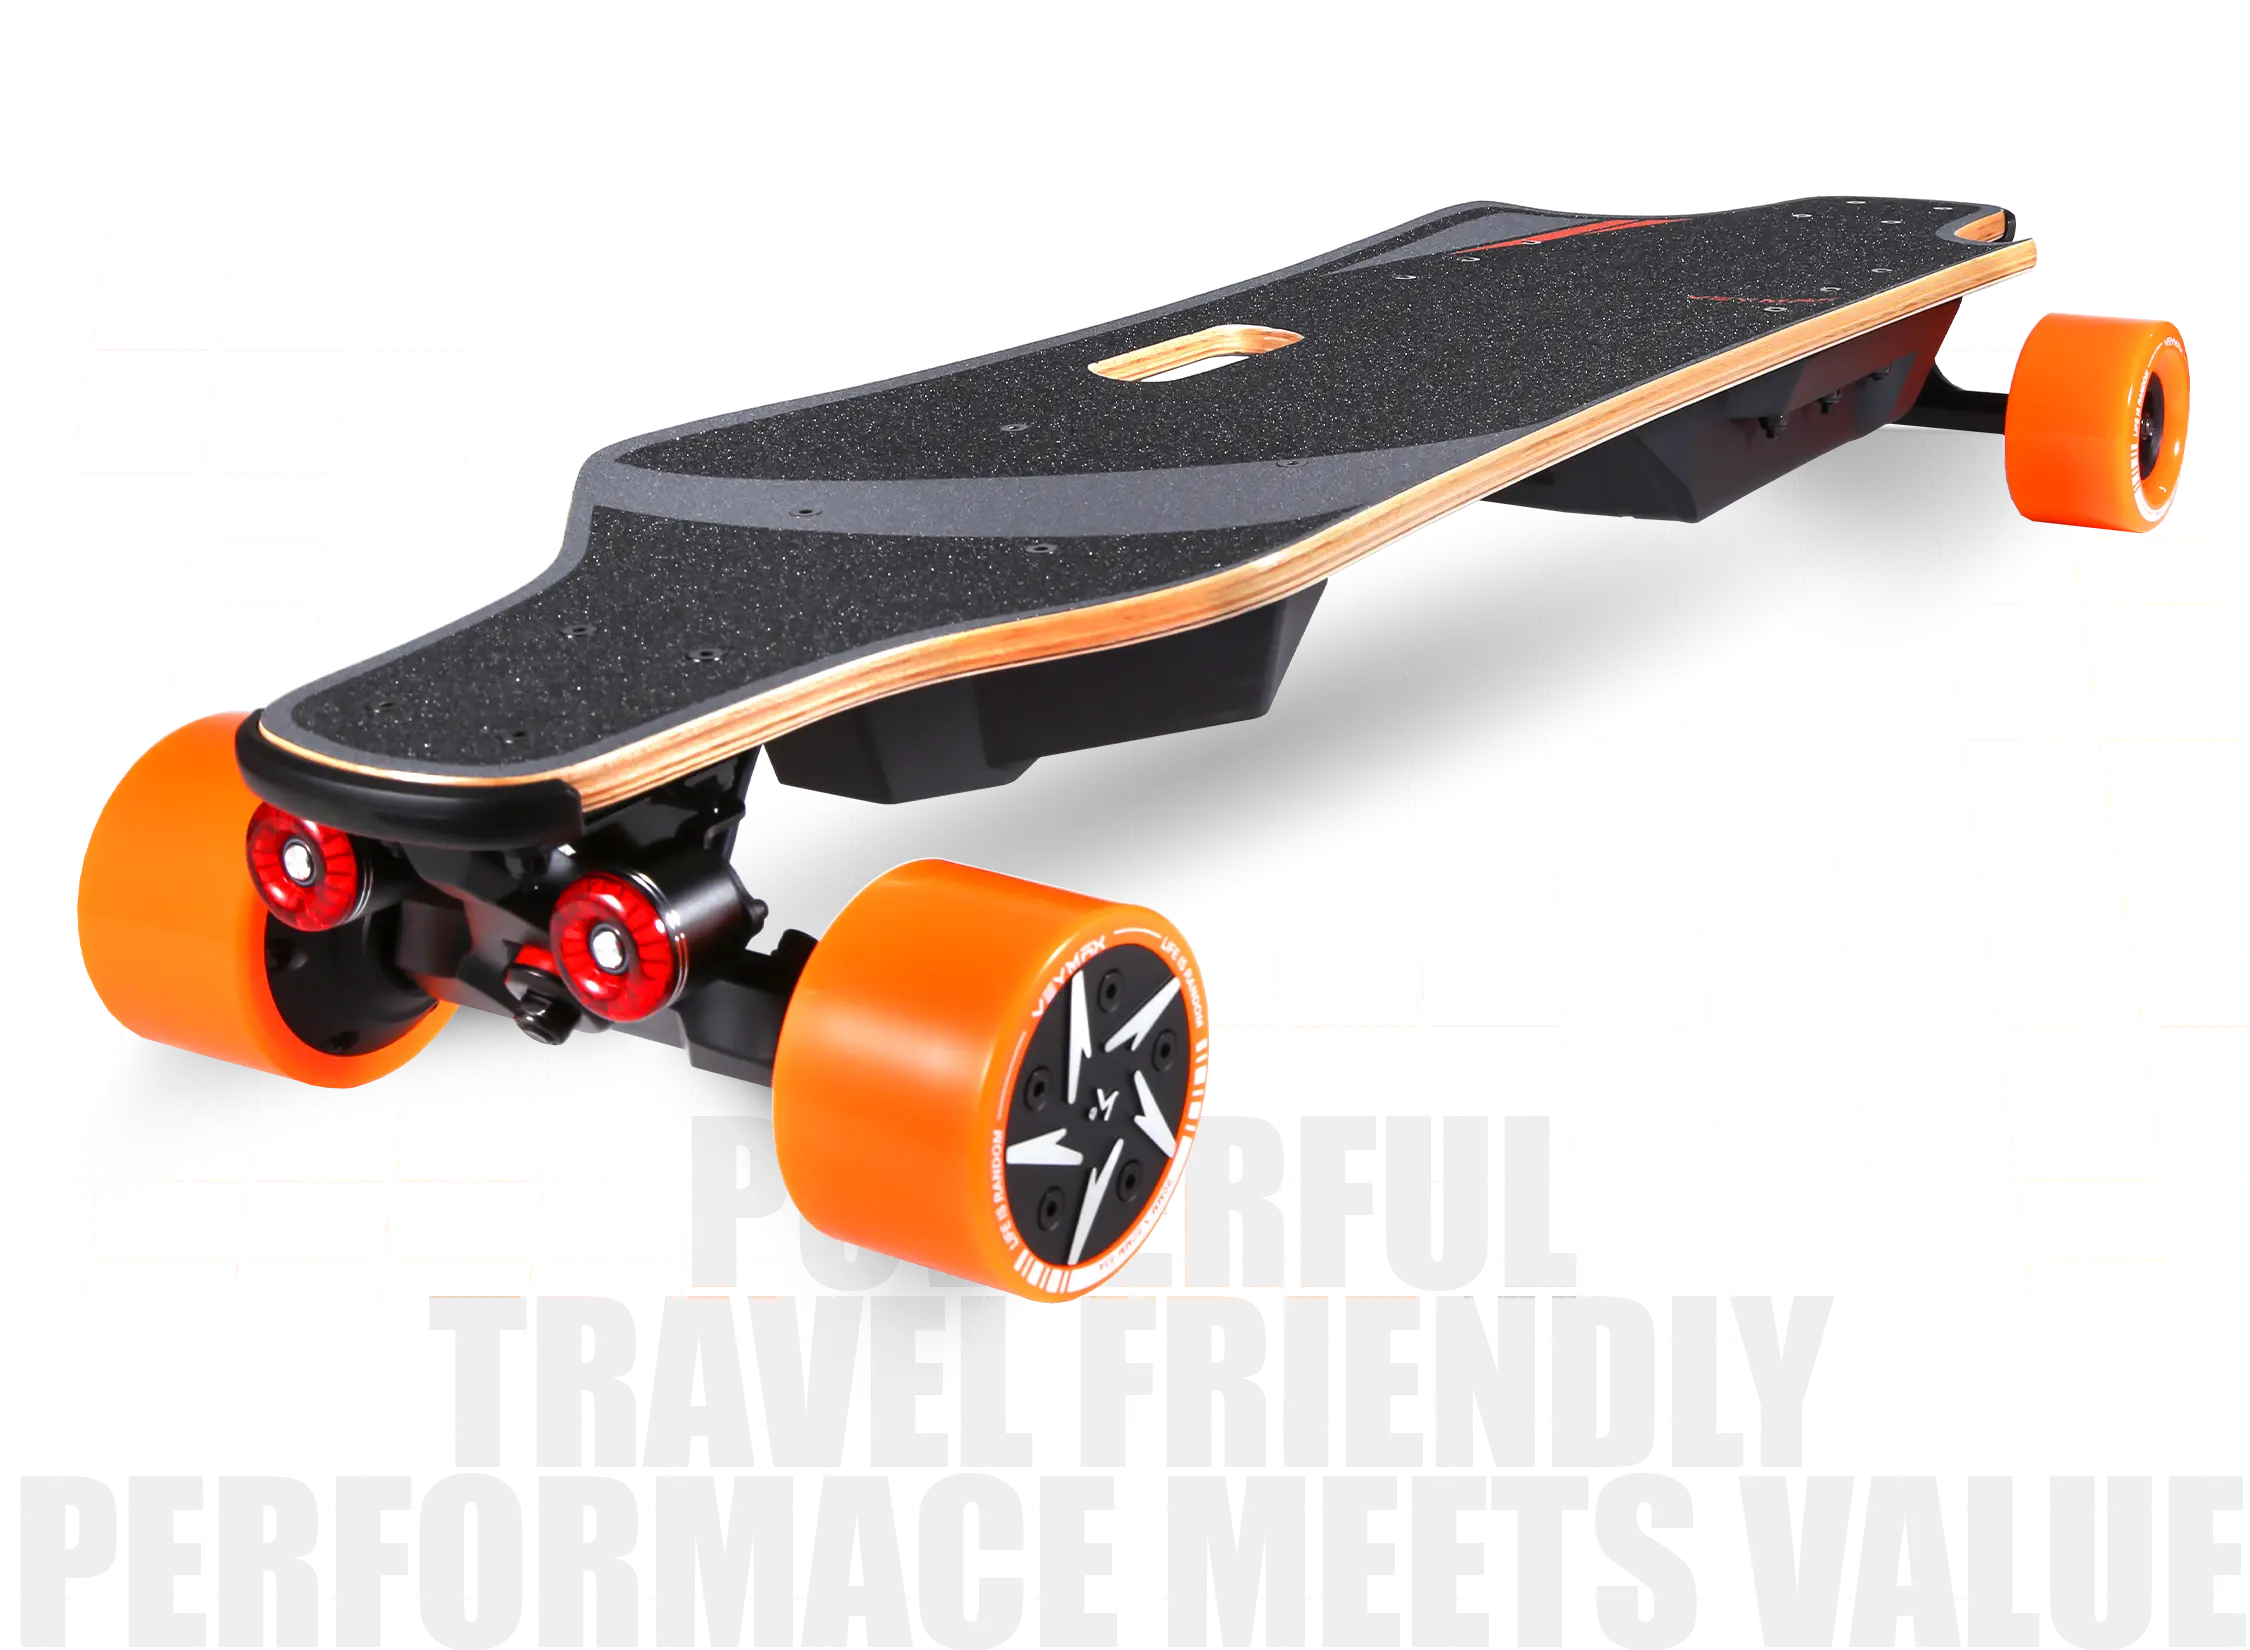 The best entry-level electric skateboard